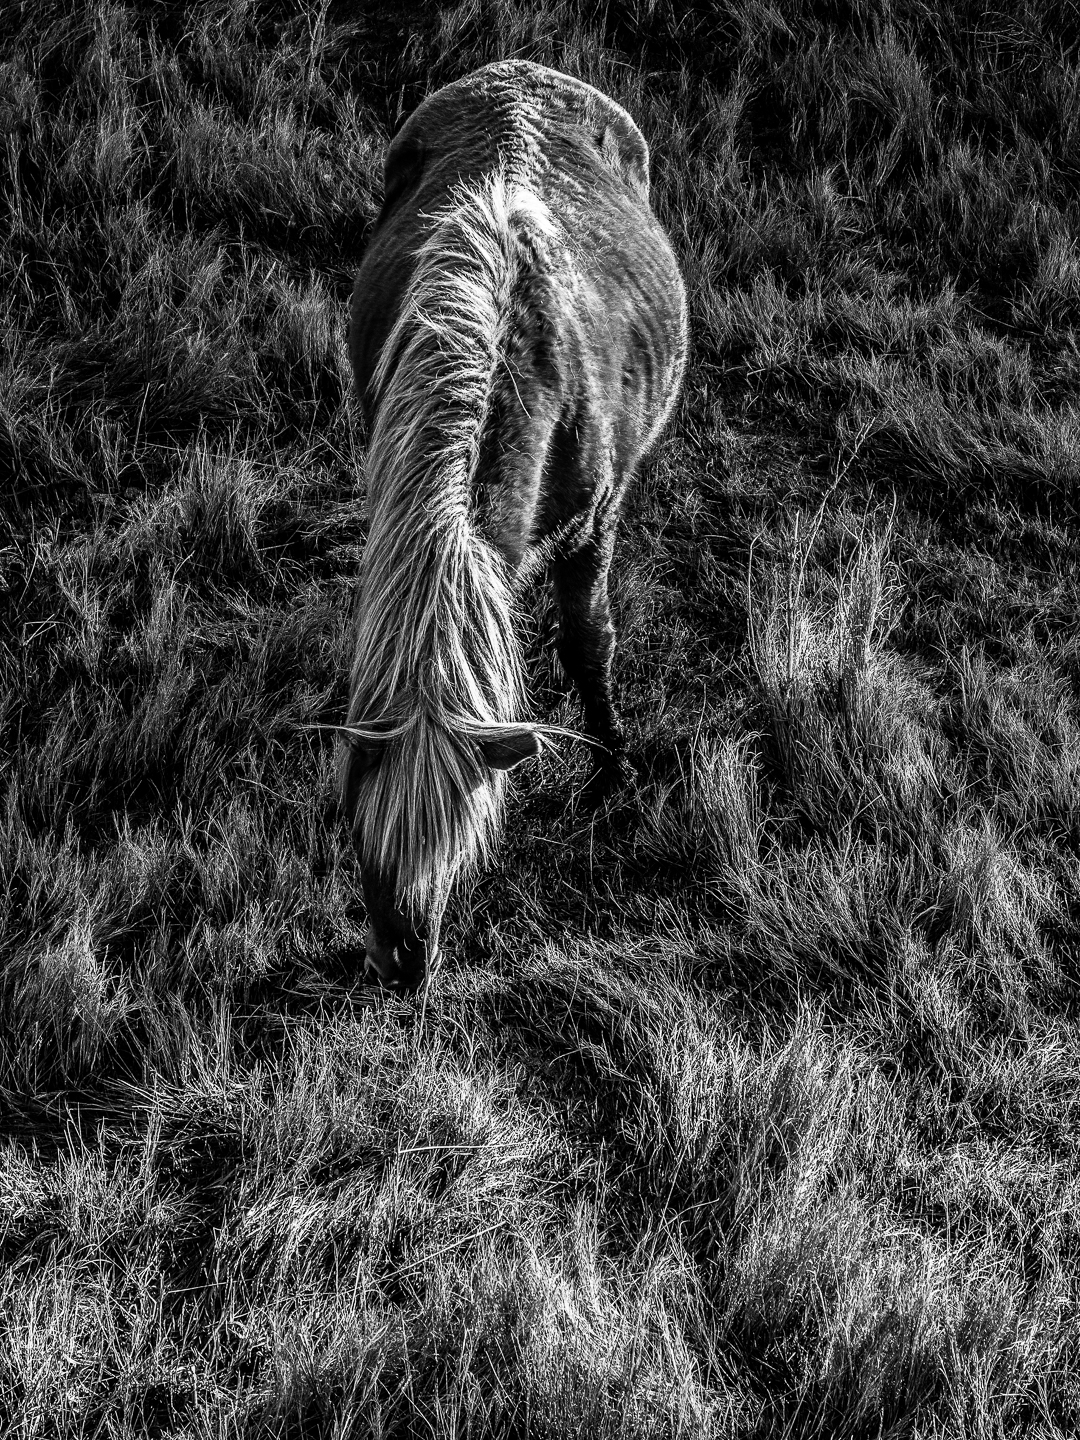 3rd PrizeOpen Mono In Class 3 By Edward Crawford For Grazing At Sunrise NOV-2021.jpg